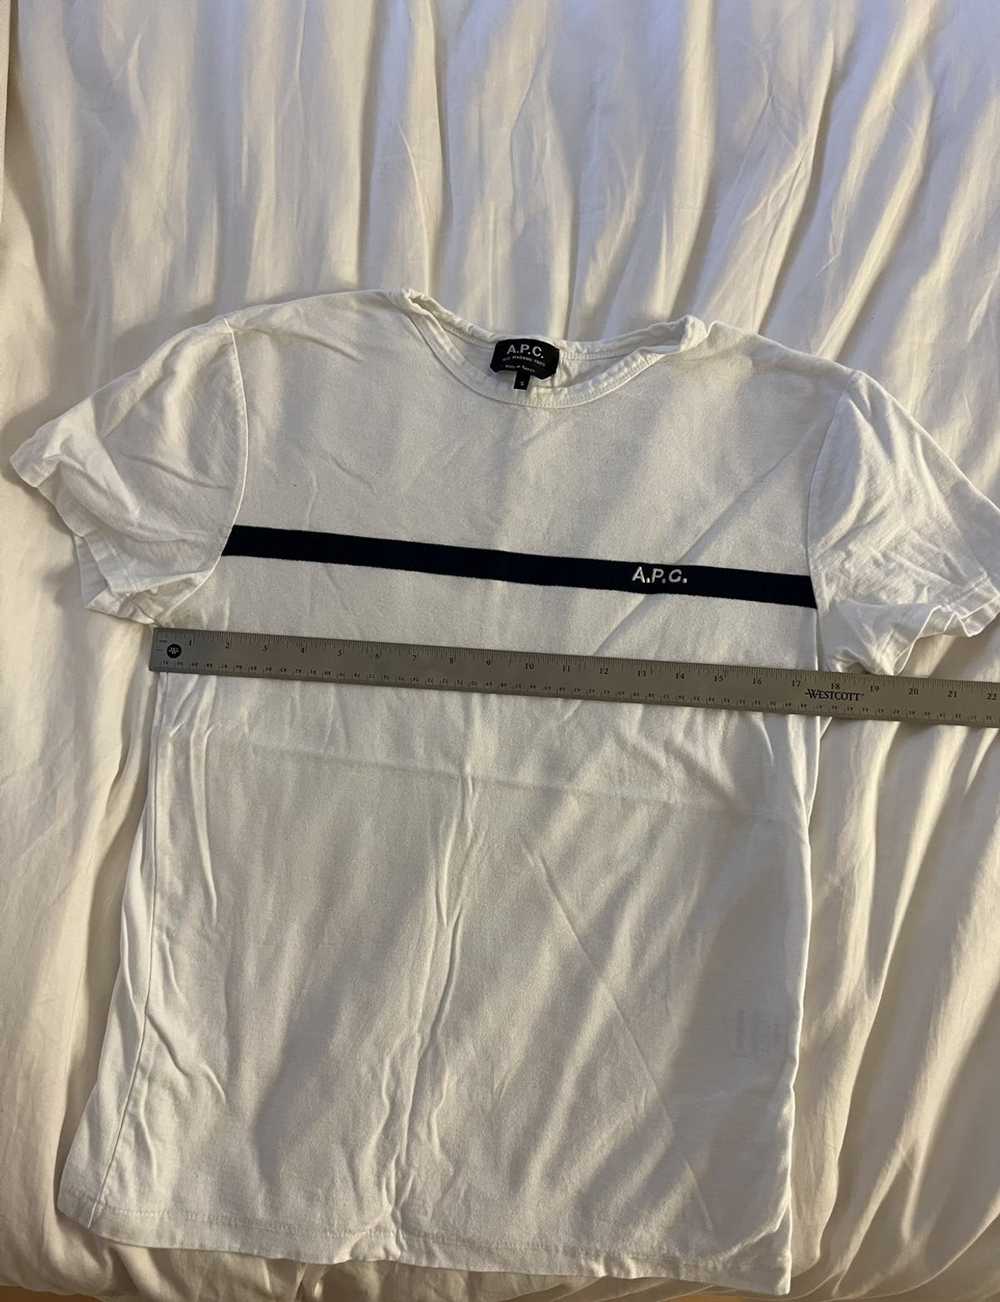 A.P.C. White A.P.C. Tshirt with Navy Stripe - image 4